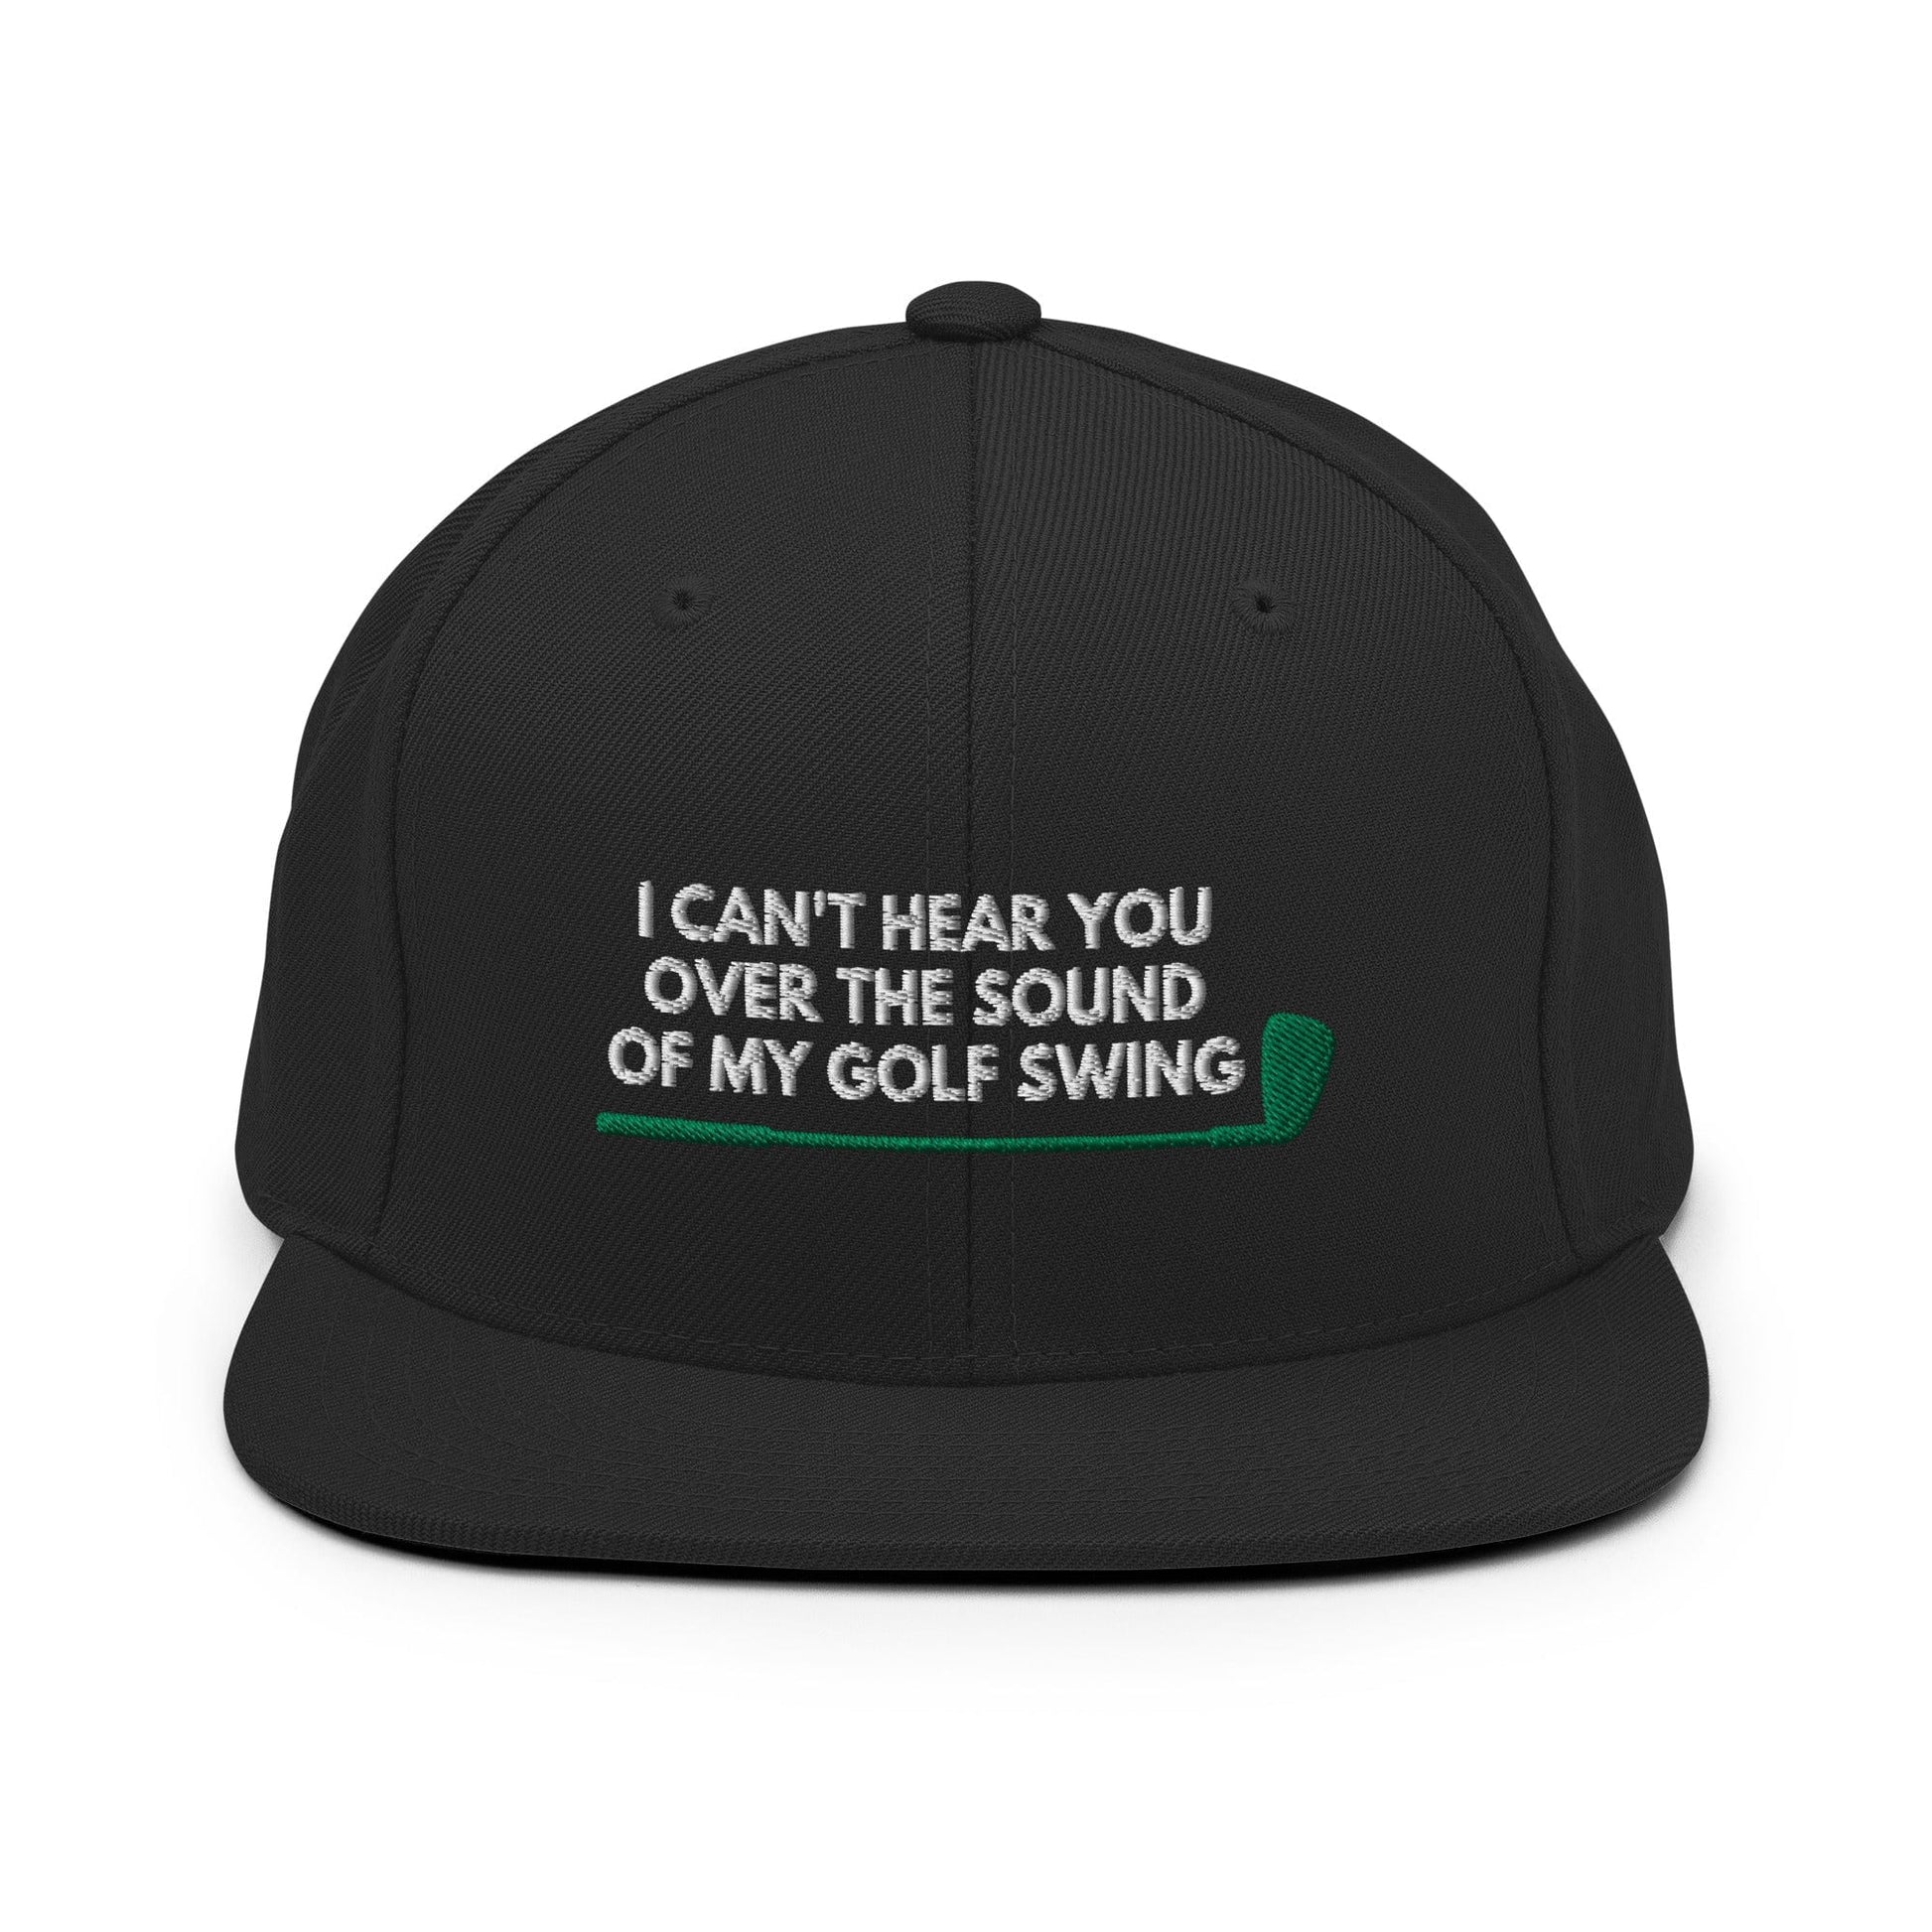 Funny Golfer Gifts  Snapback Hat Black I Cant Hear You Over The Sound Of My Golf Swing Hat Snapback Hat